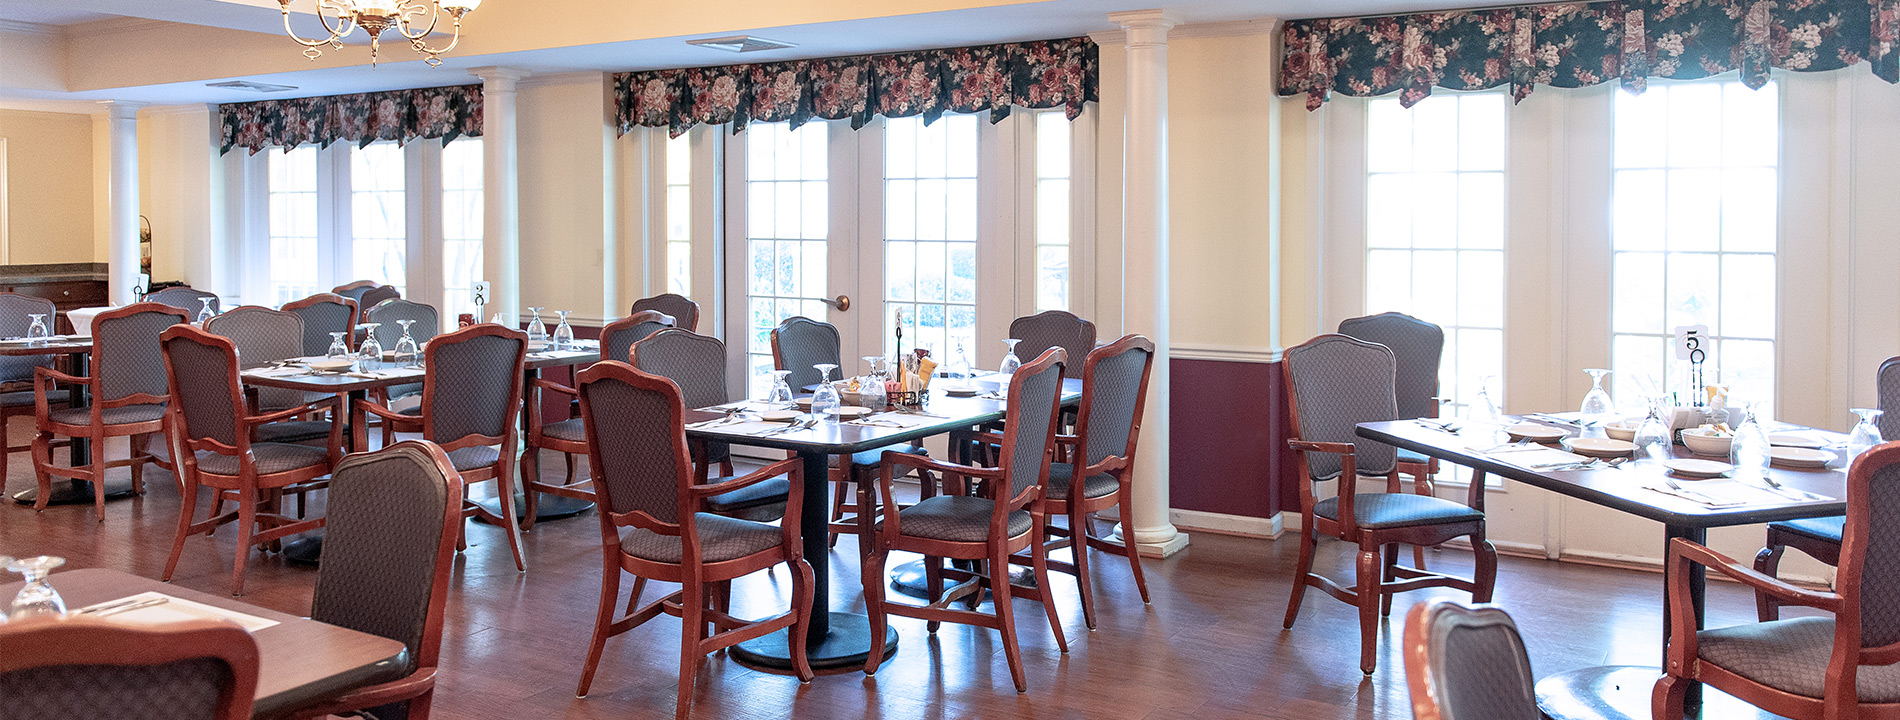 casual dining area with set tables, chairs and bright windows